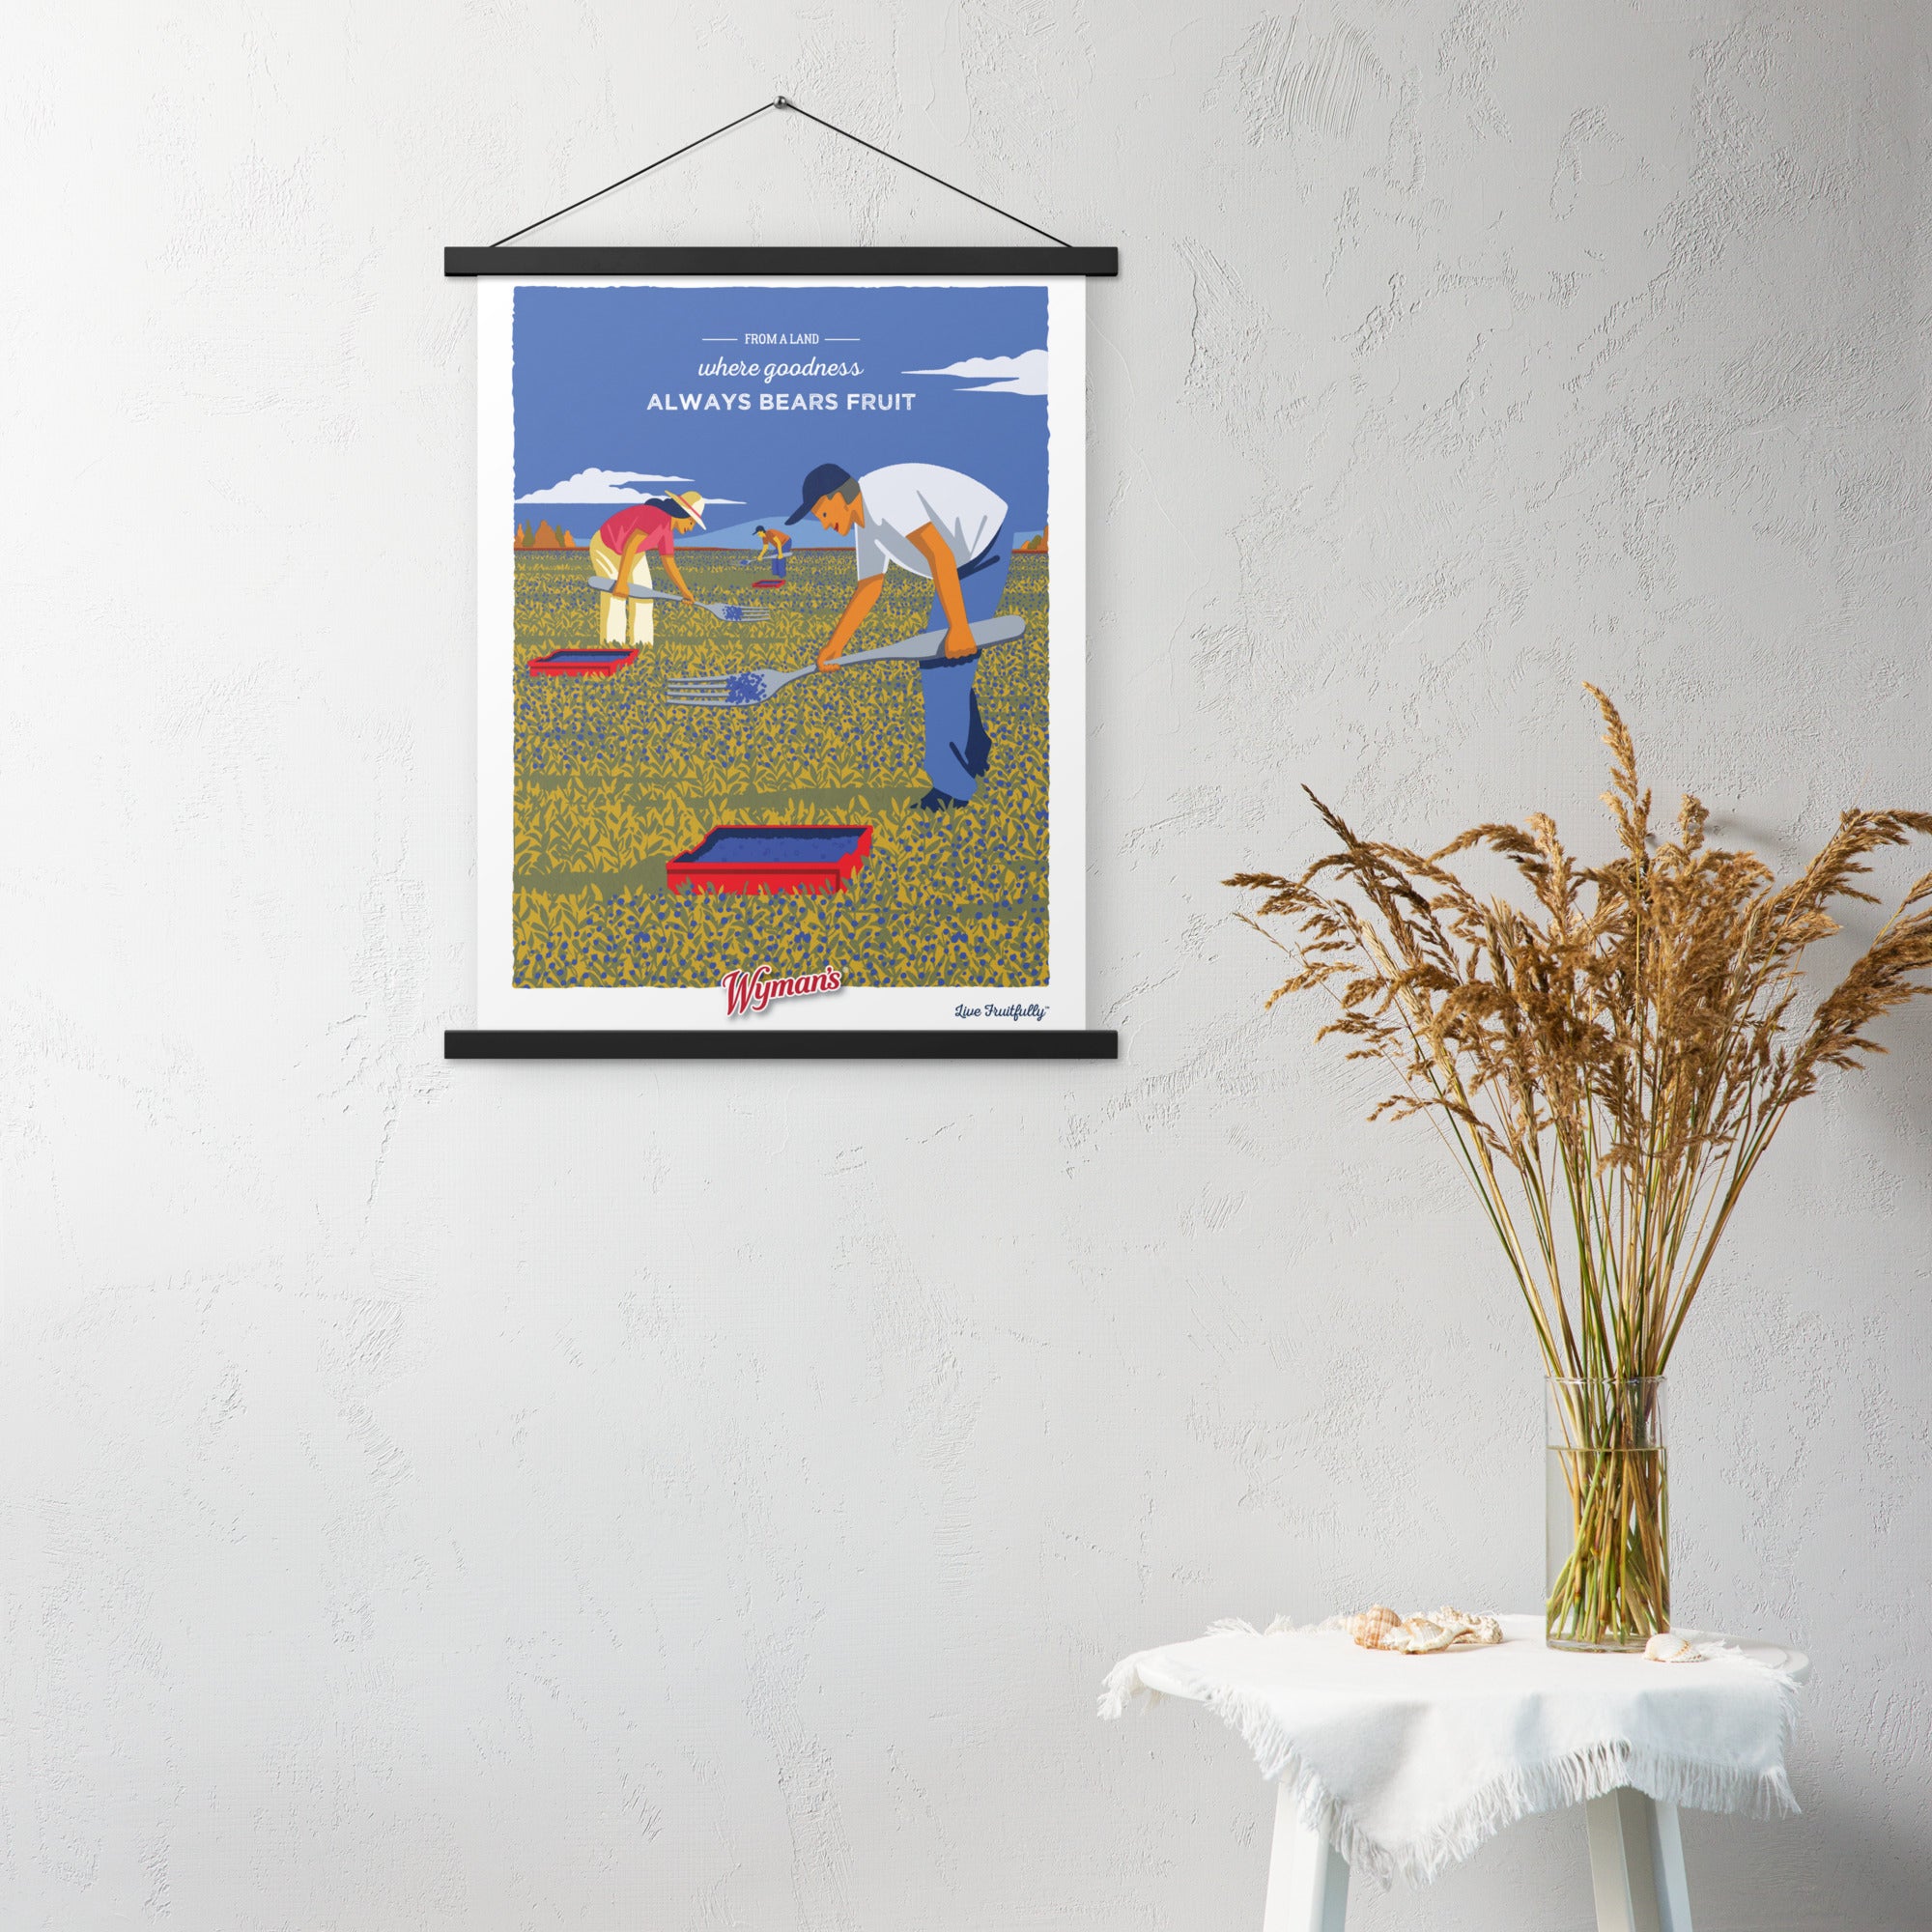 A Shop Wyman's "From a Land Where Goodness Always Bears Fruit" poster with a picture of a man picking blueberries in a field.